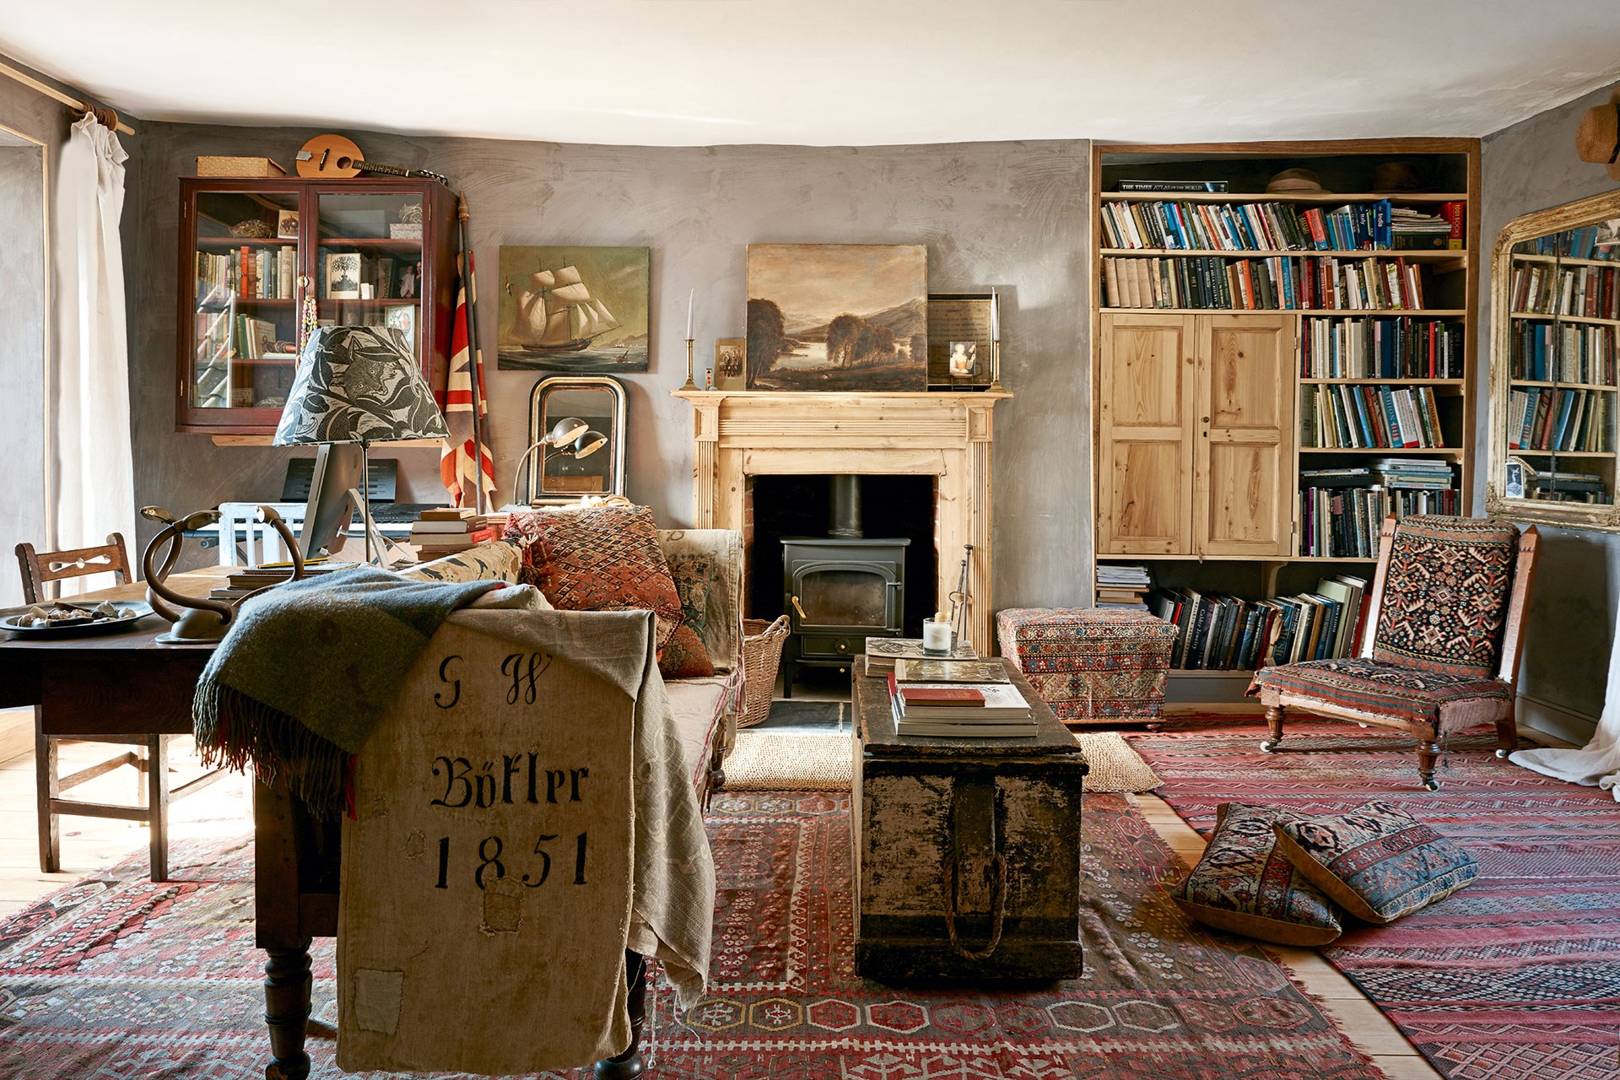 How To Pull Of Vintage Interior Design That Still Works Today